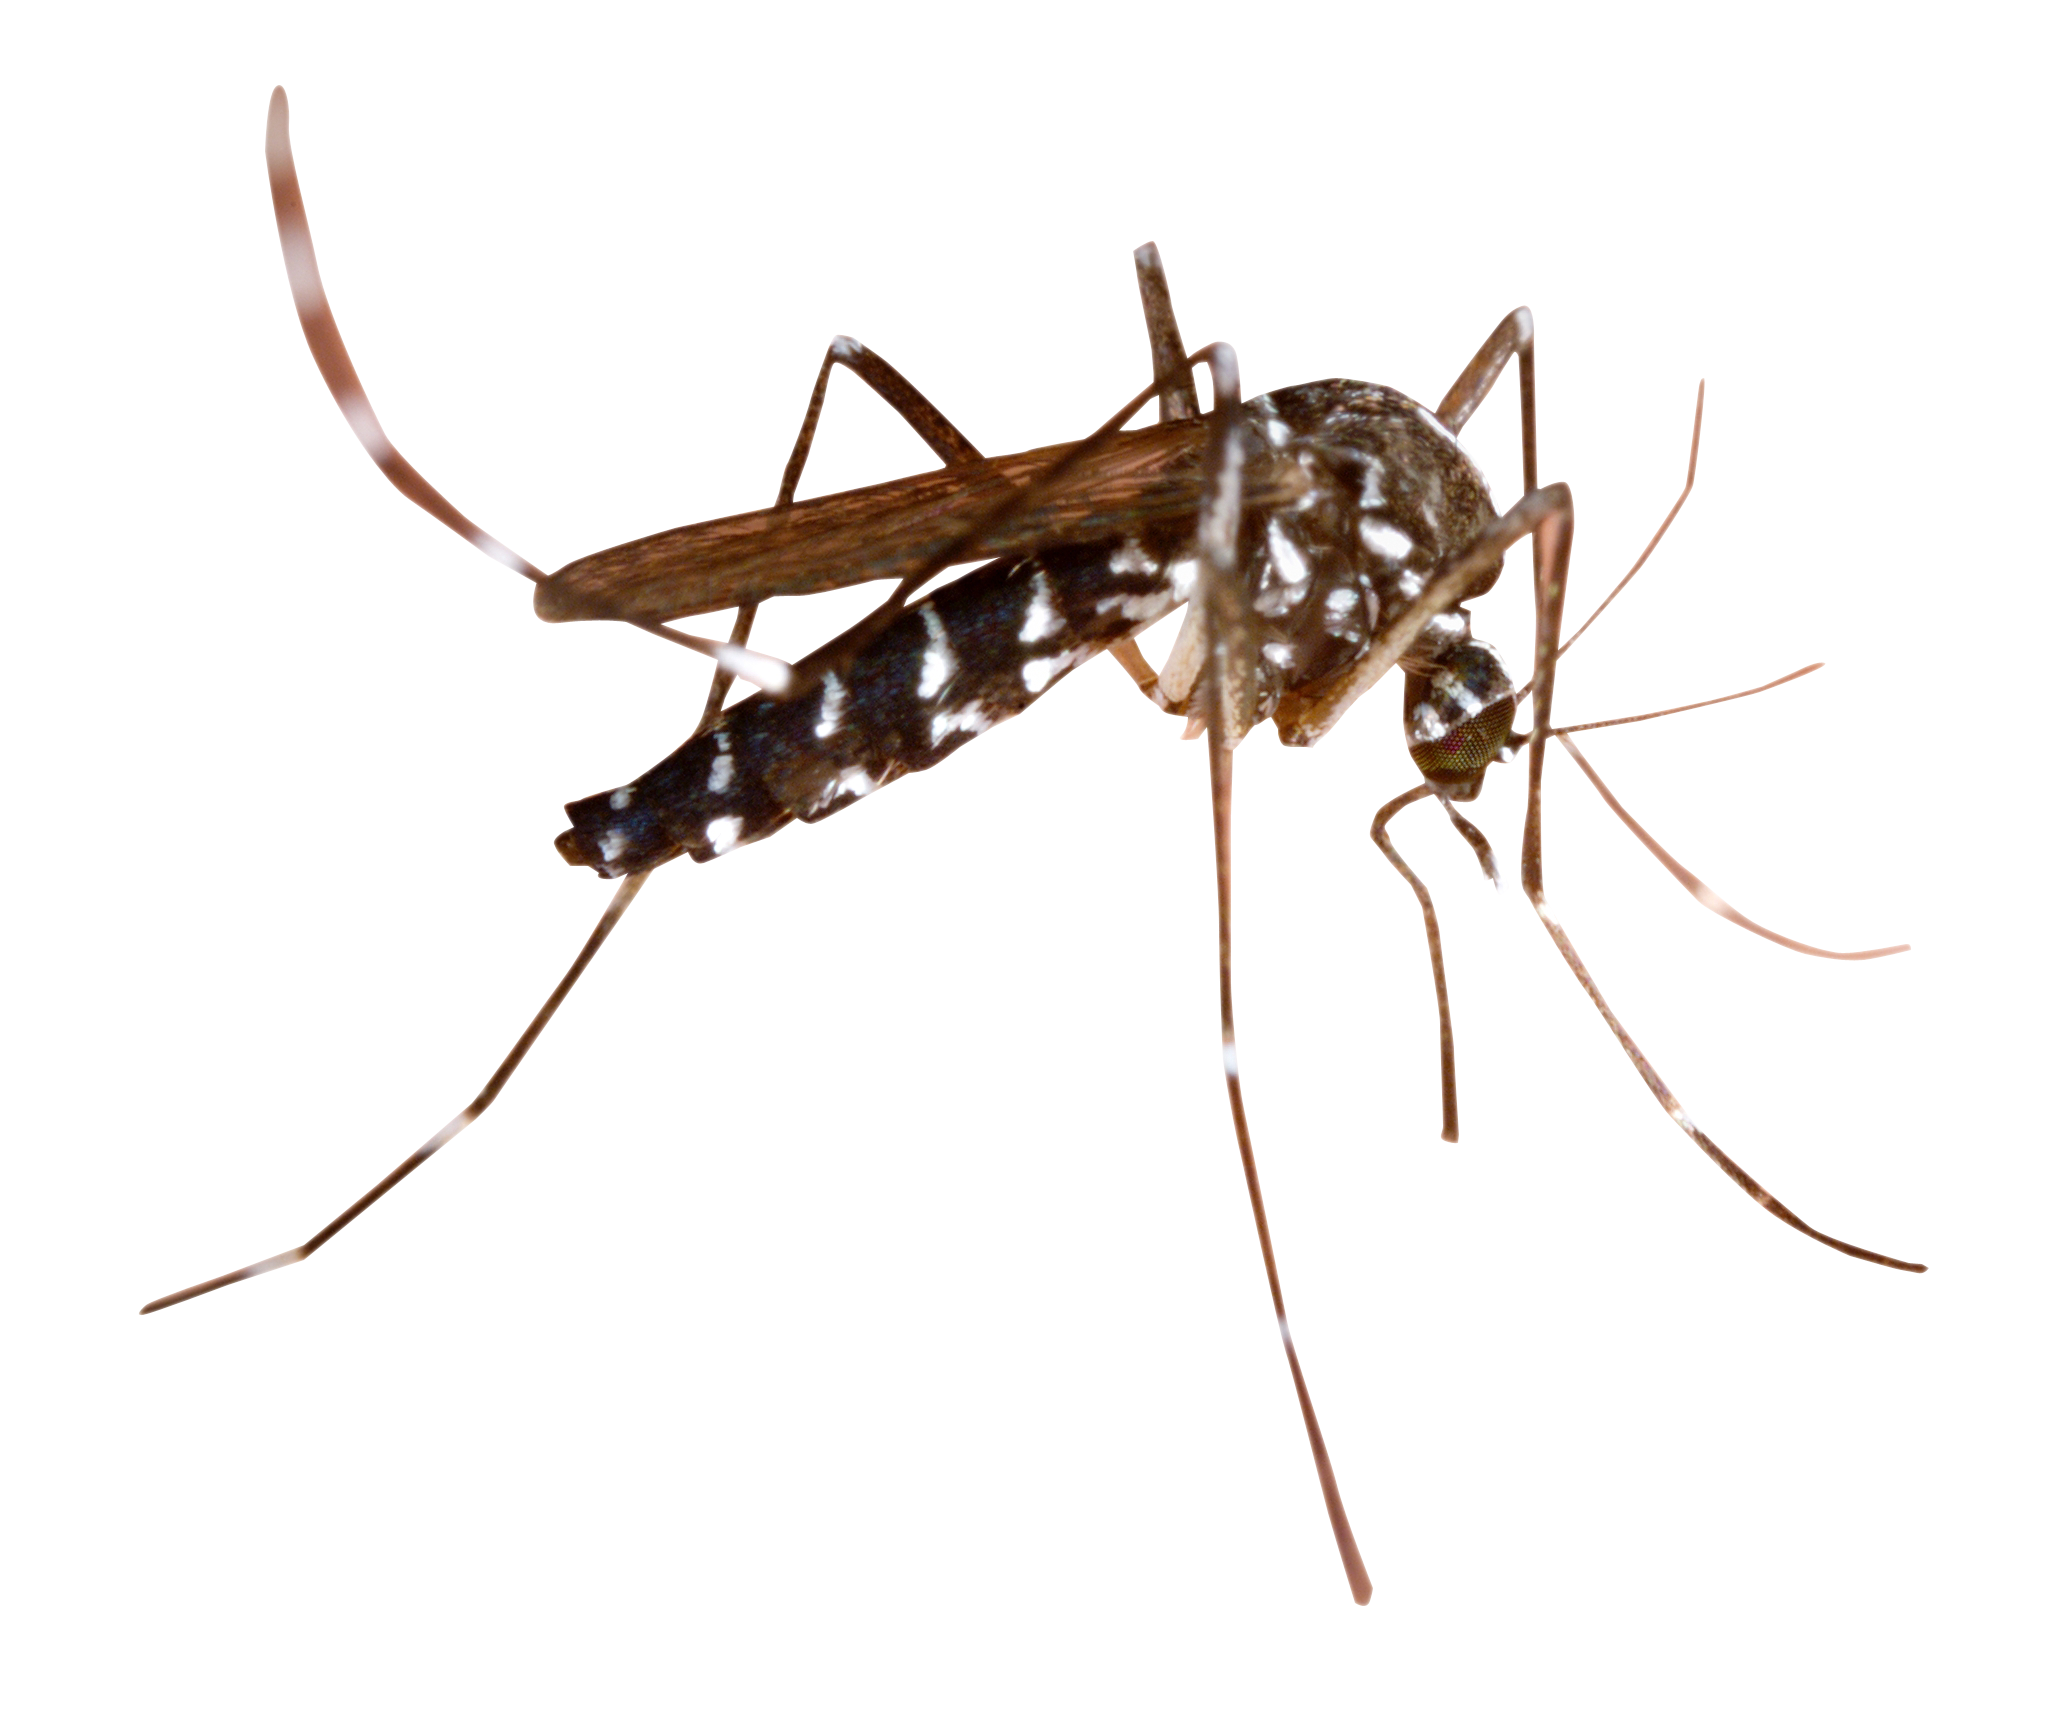 Mosquito High-Quality Png PNG